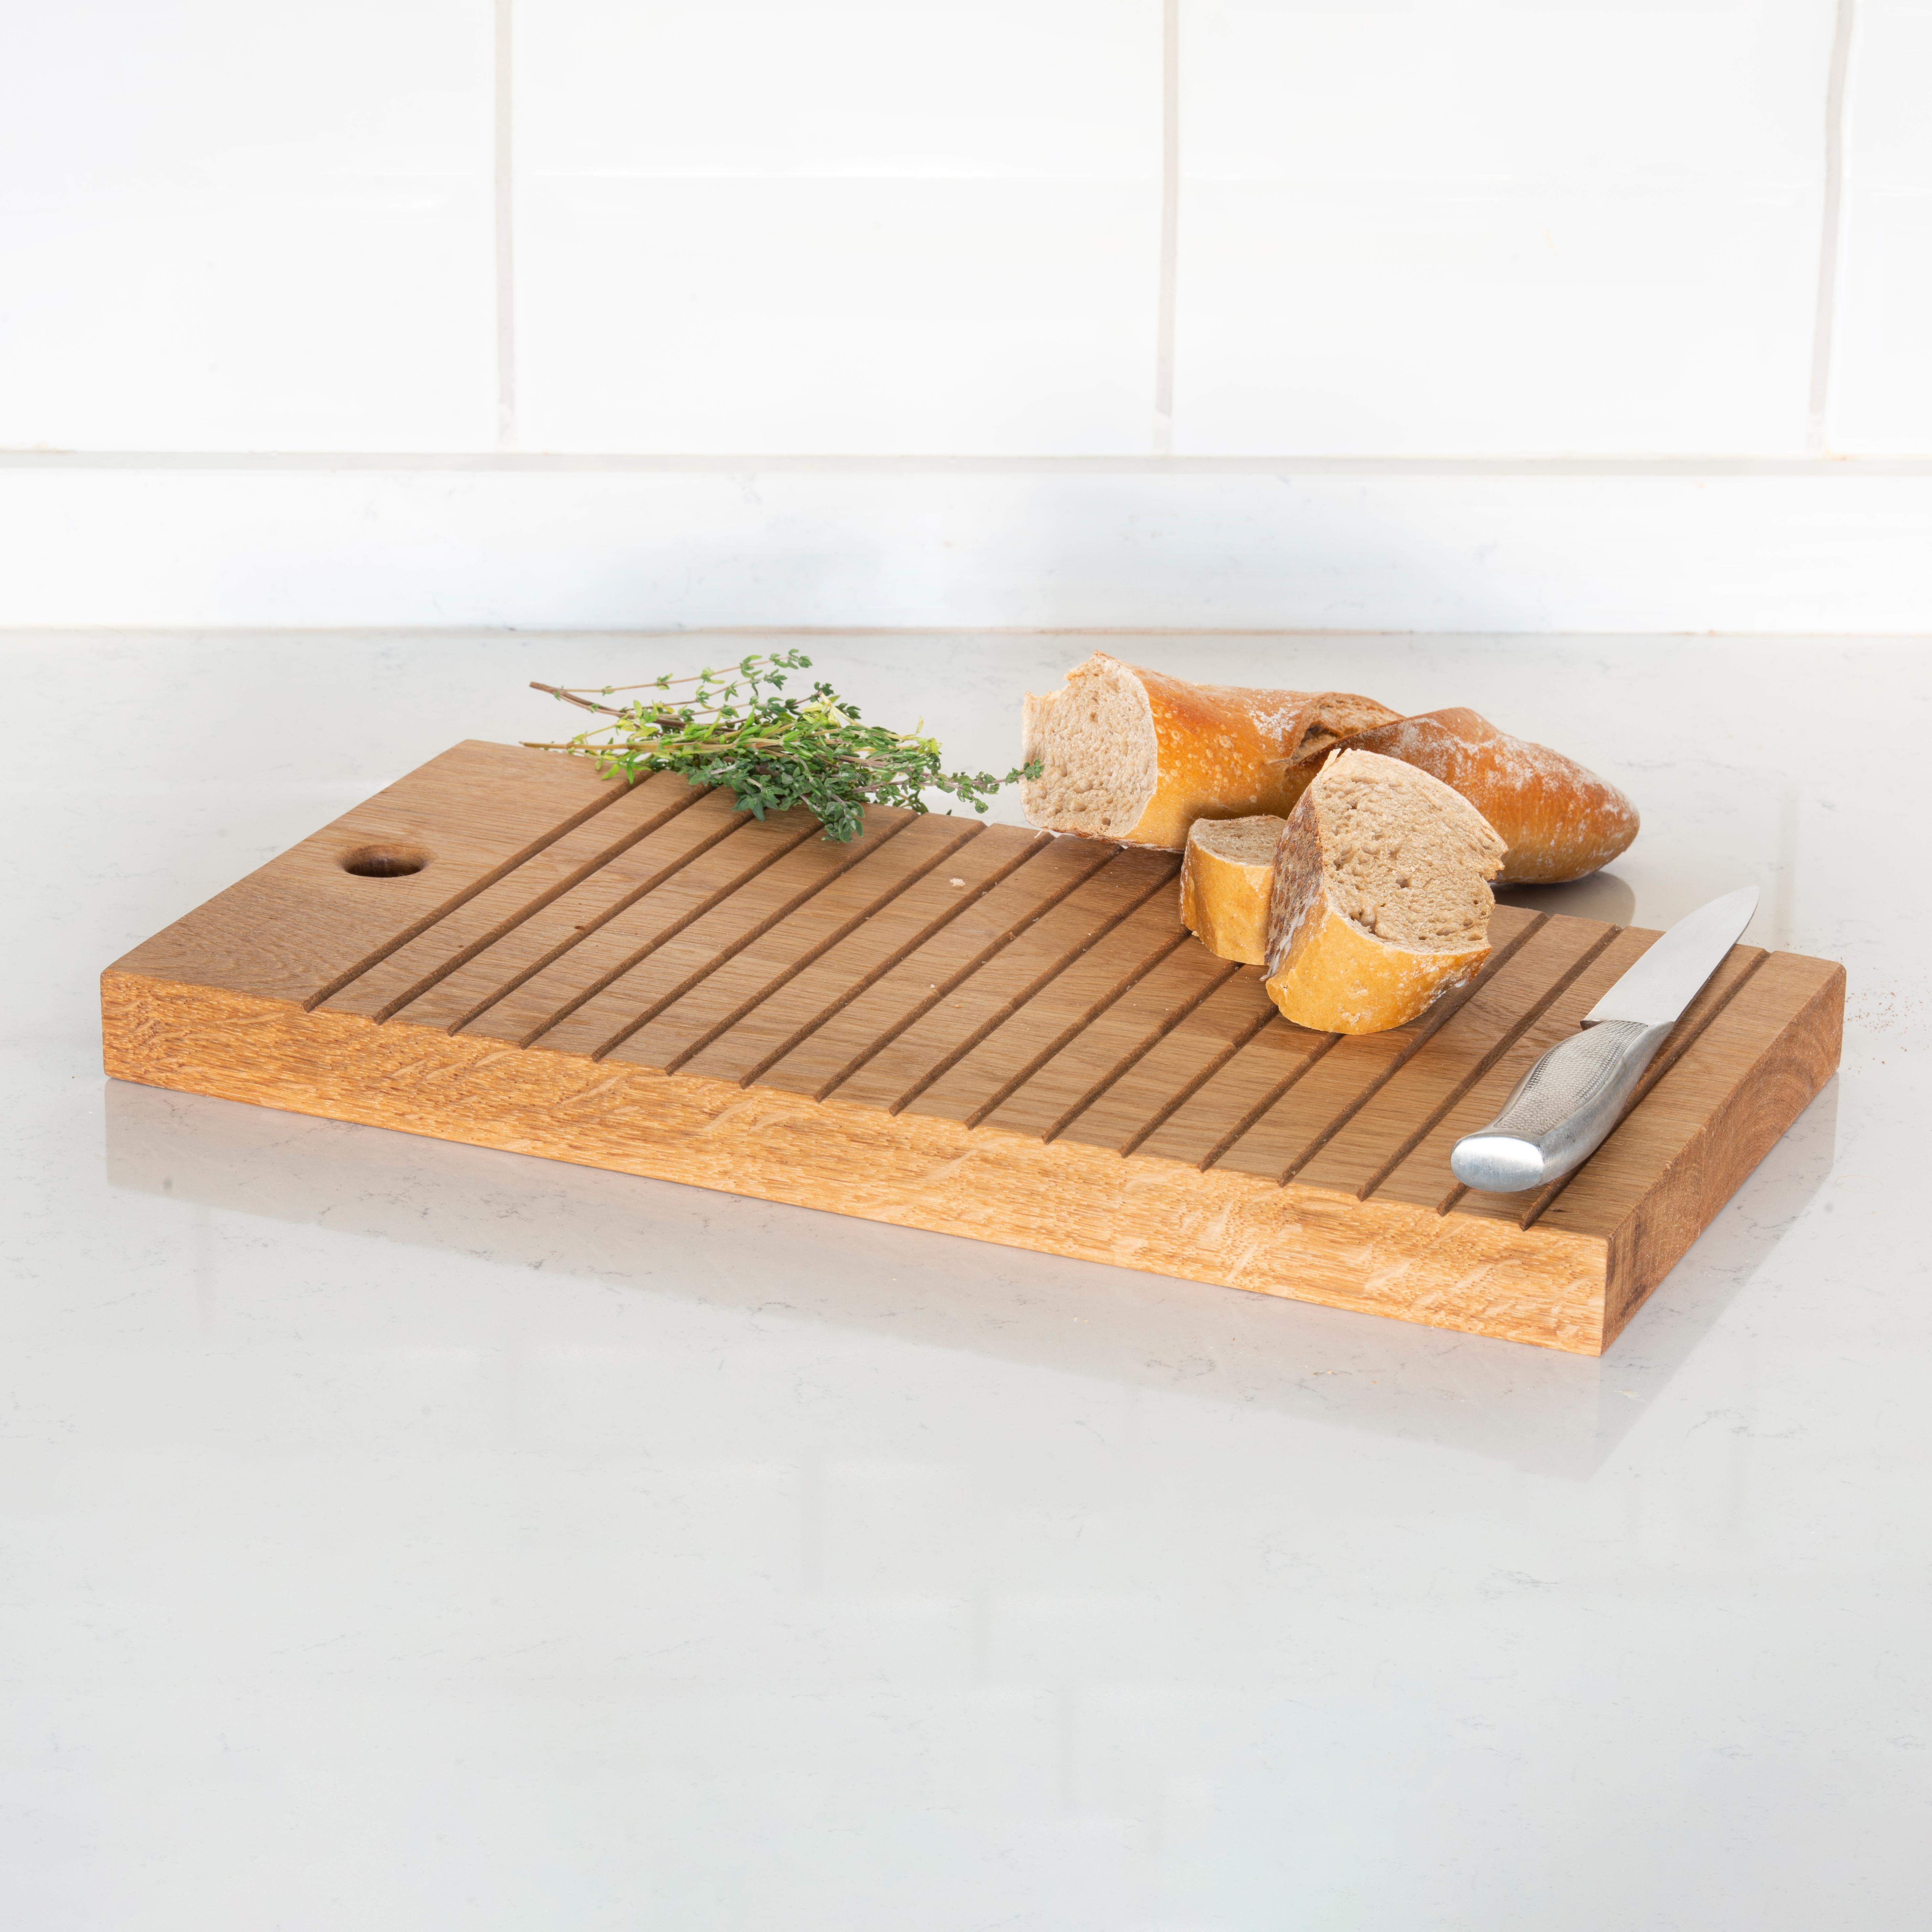 The Block slicing board is a culinary tool designed with precision and functionality in mind. Its surface is adorned with carefully etched lines that serve as guides for slicing foods of various sizes. Whether you're cutting through a loaf of crusty